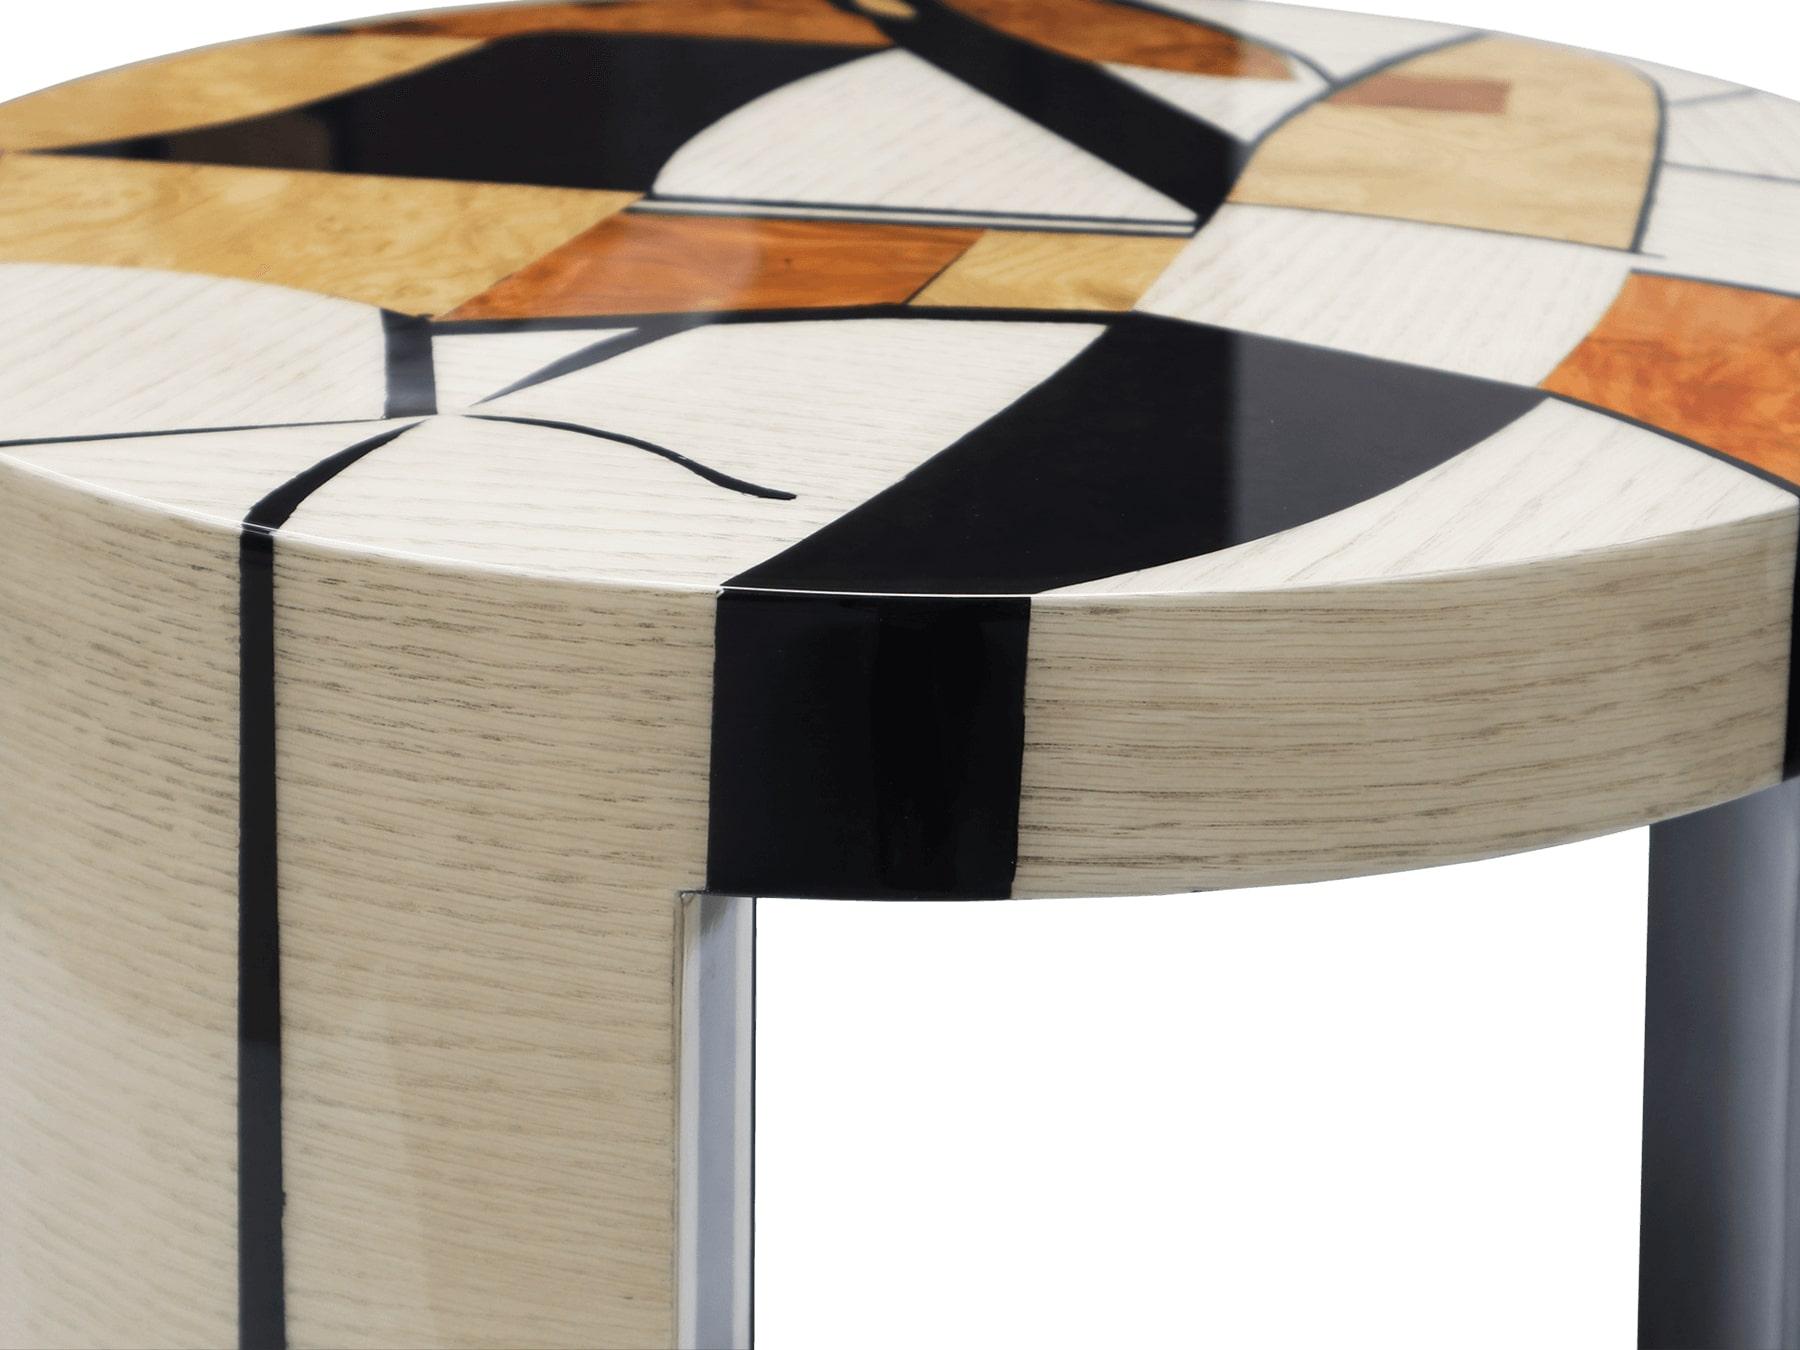 contemporary side tables